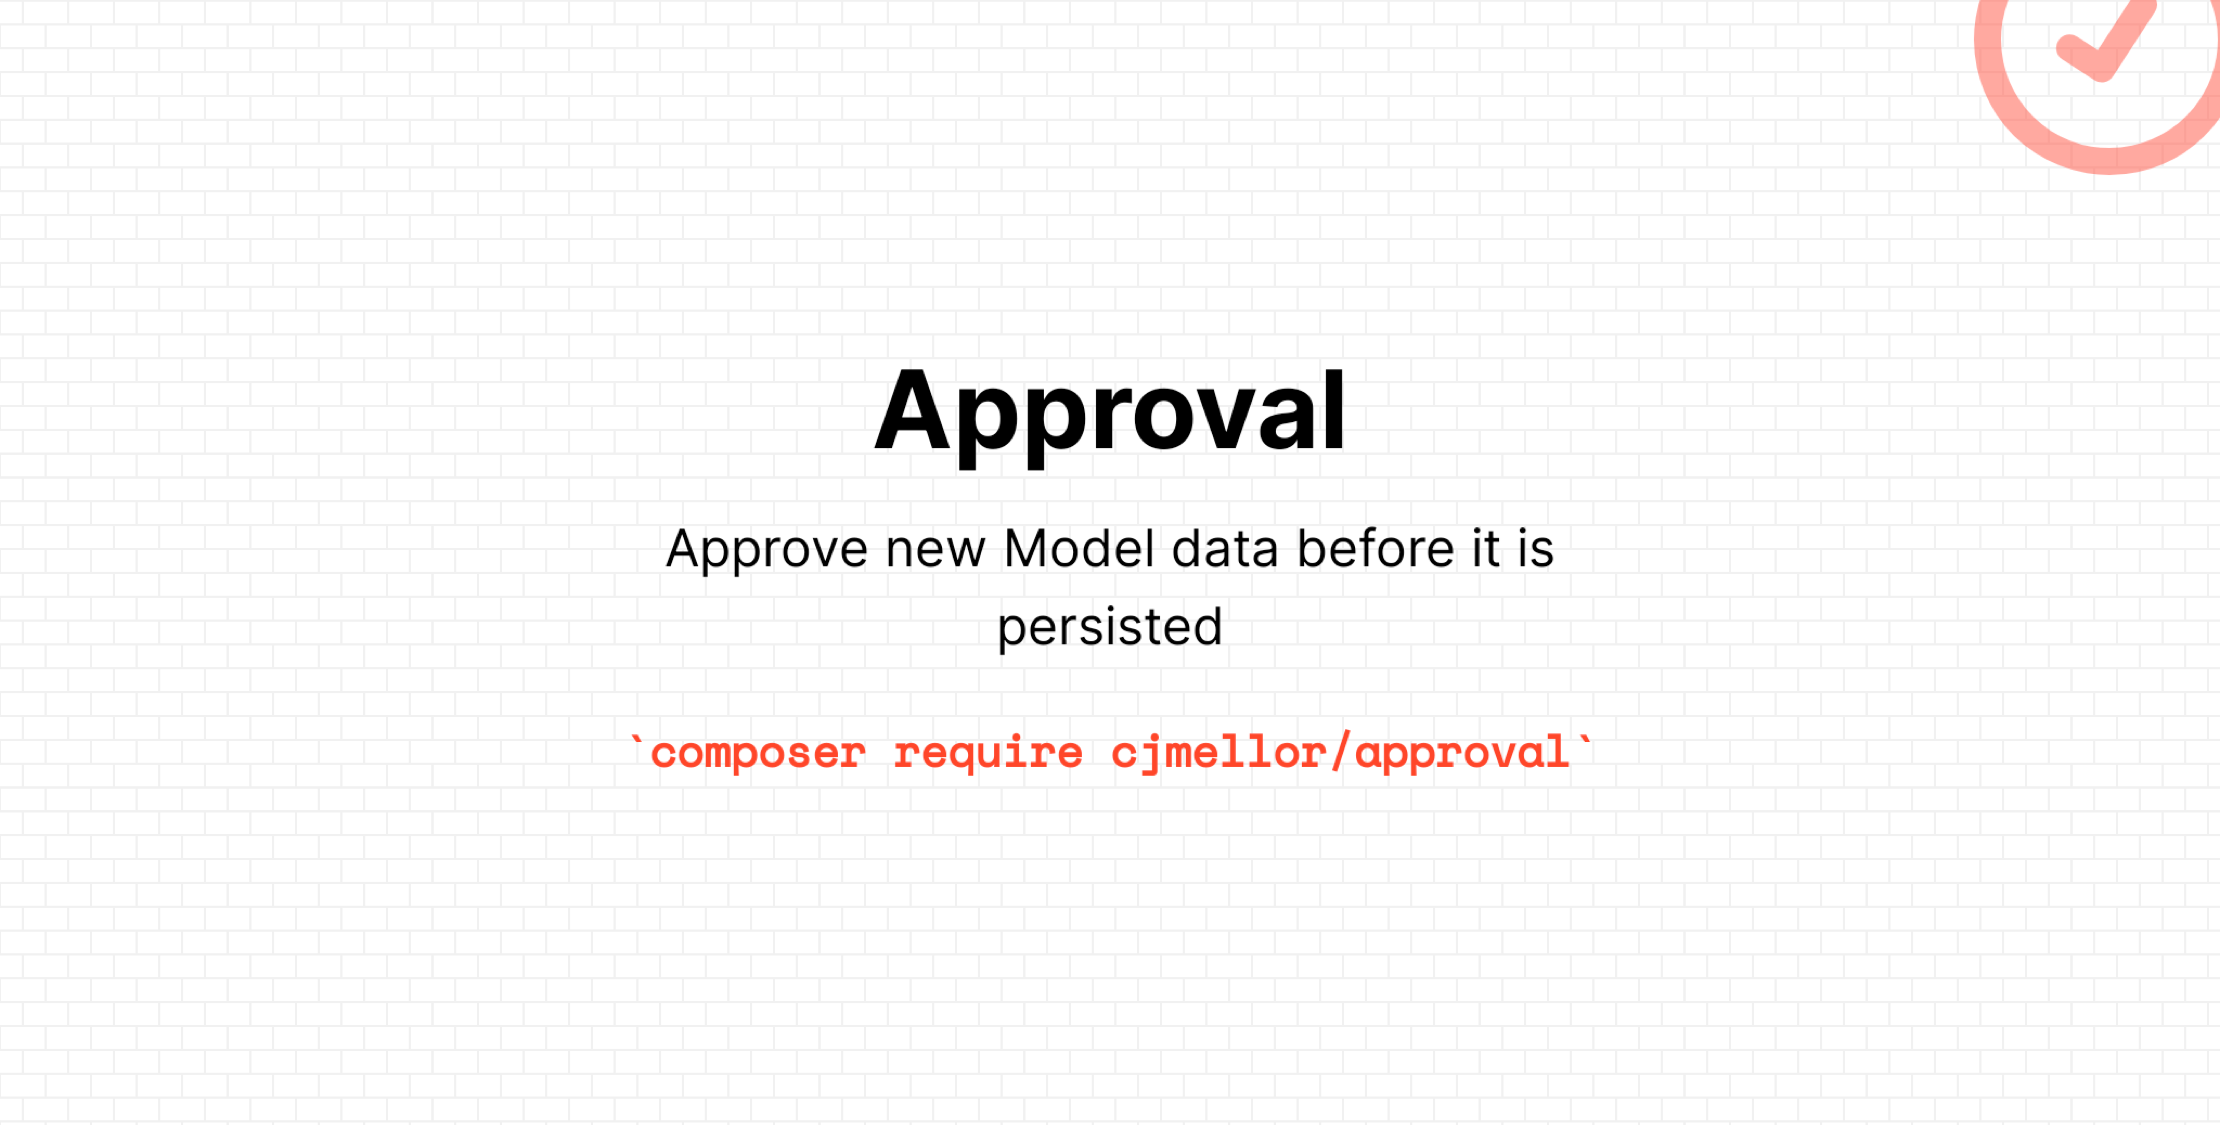 A Package to Require Approval Before Peristing Model Data image